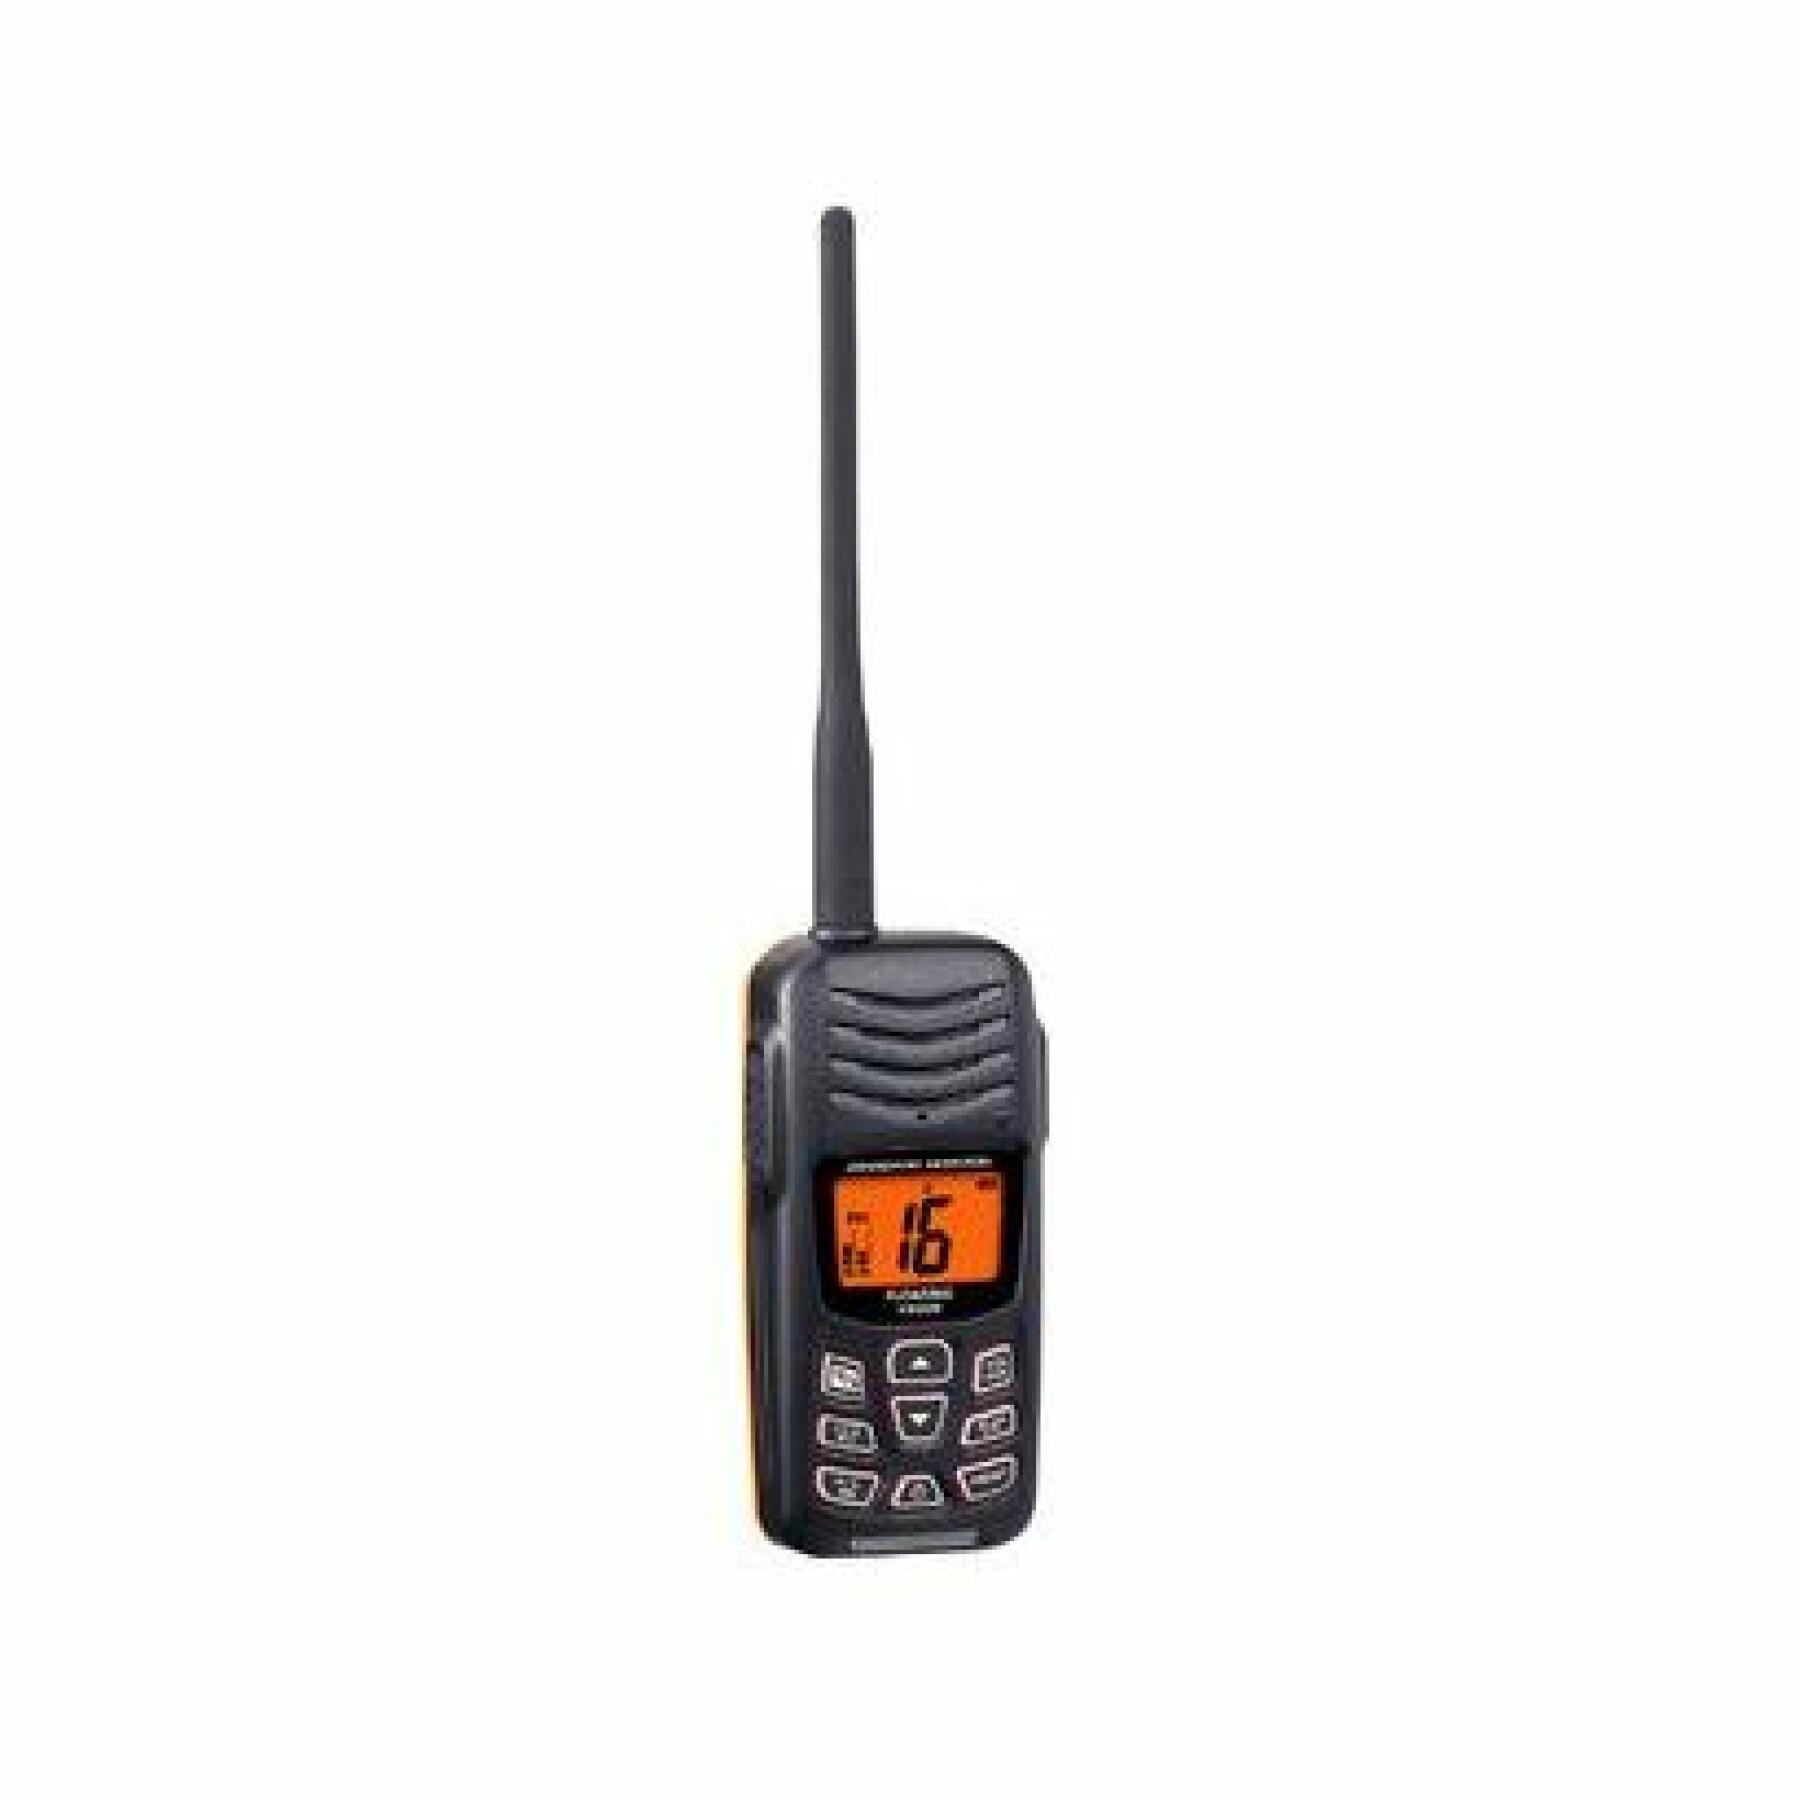 Vhf portable waterproof floating delivered with charger, clip, usb cable Standard Horizon